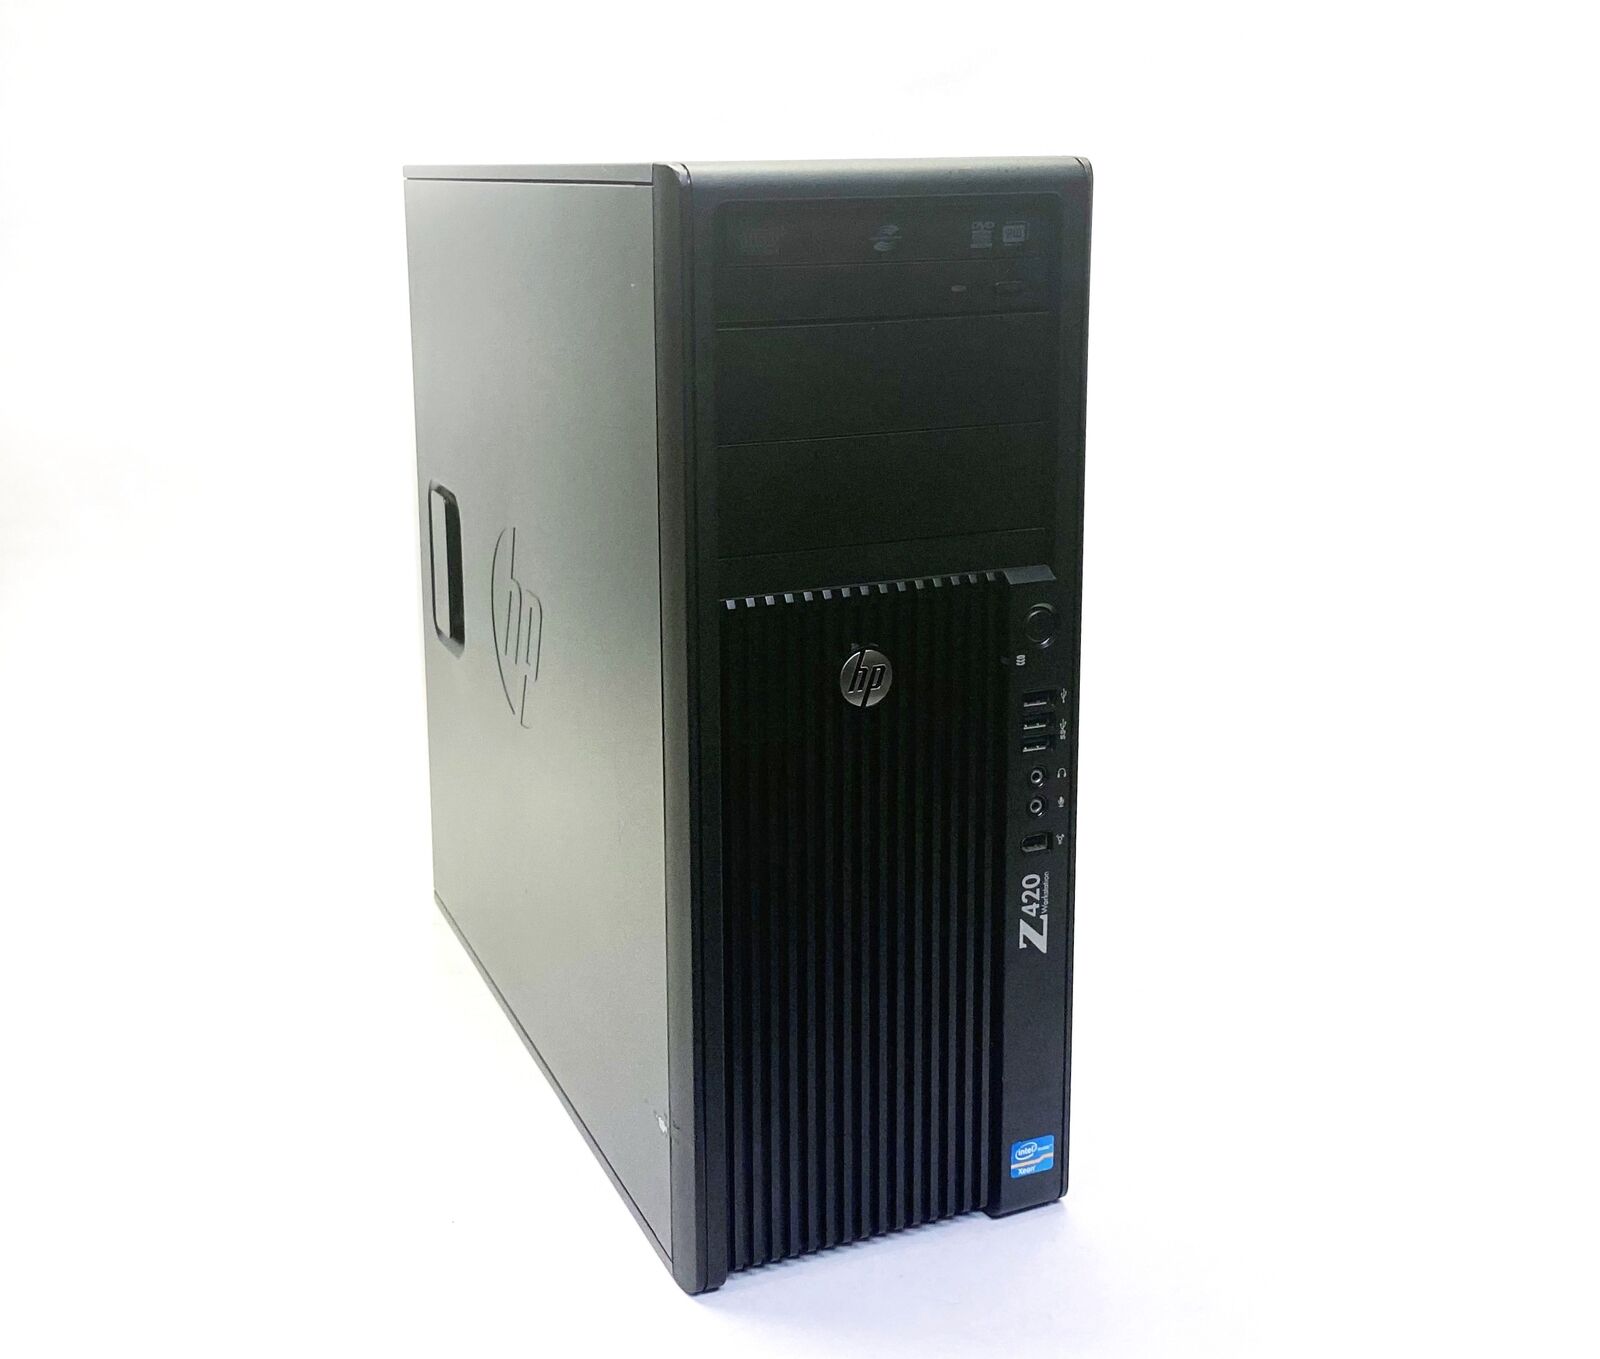 HP Z420 Xeon E5-1620 (3.60 GHz, 8GB Ram, No HDD) Tower Workstation Computer